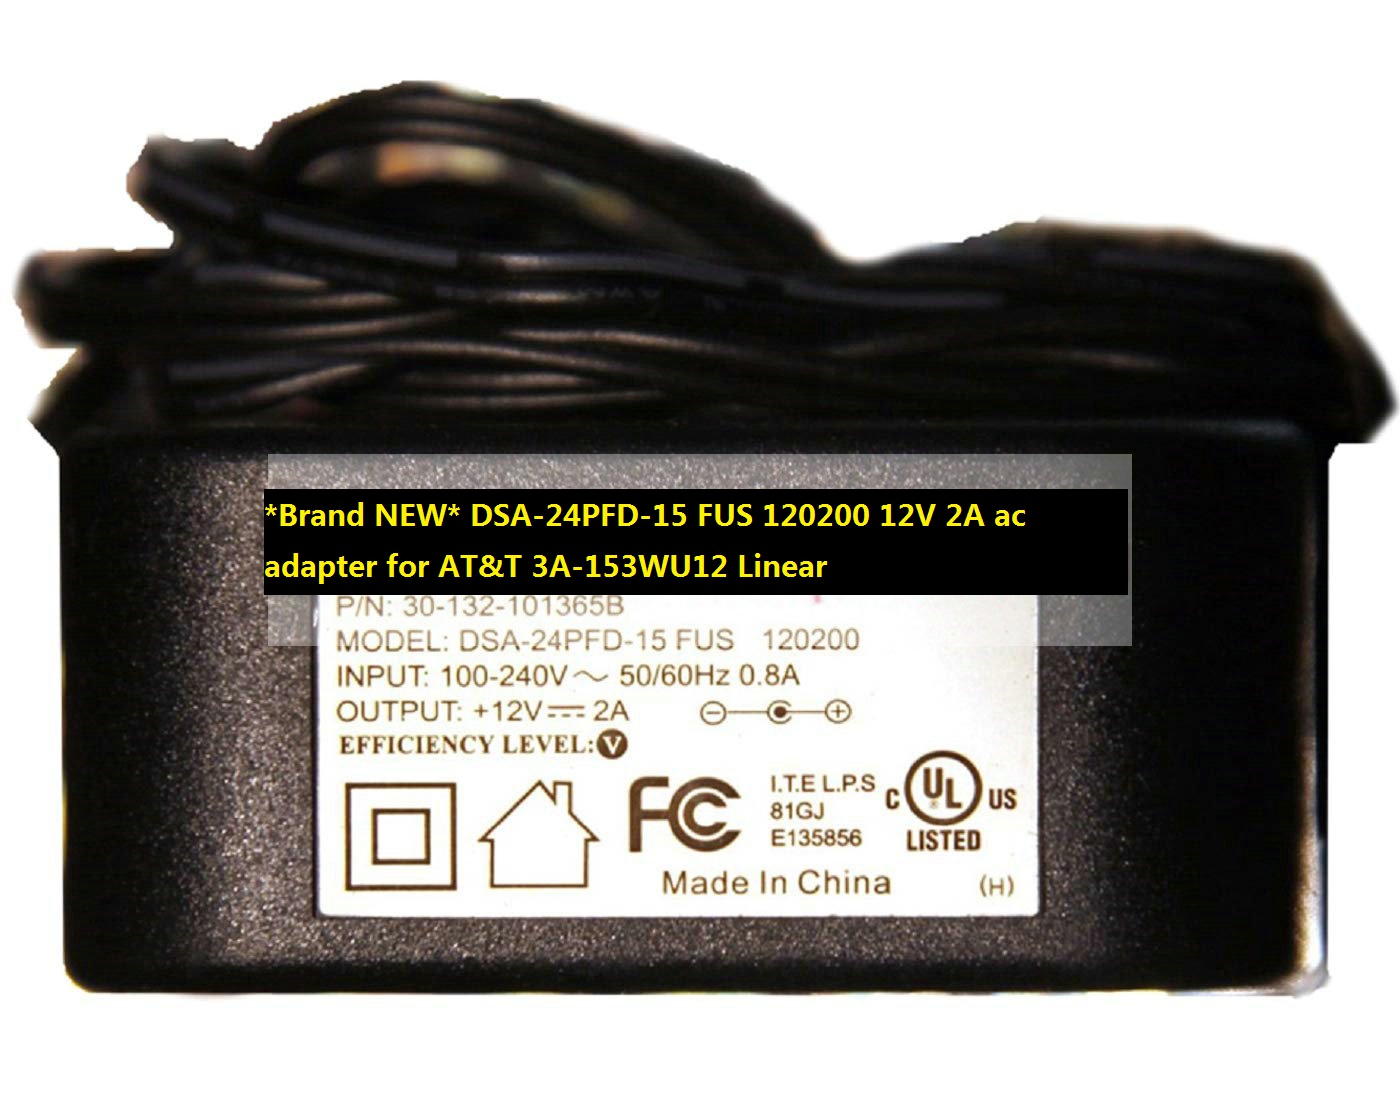 *Brand NEW* DSA-24PFD-15 FUS 120200 12V 2A ac adapter for AT&T 3A-153WU12 Linear - Click Image to Close